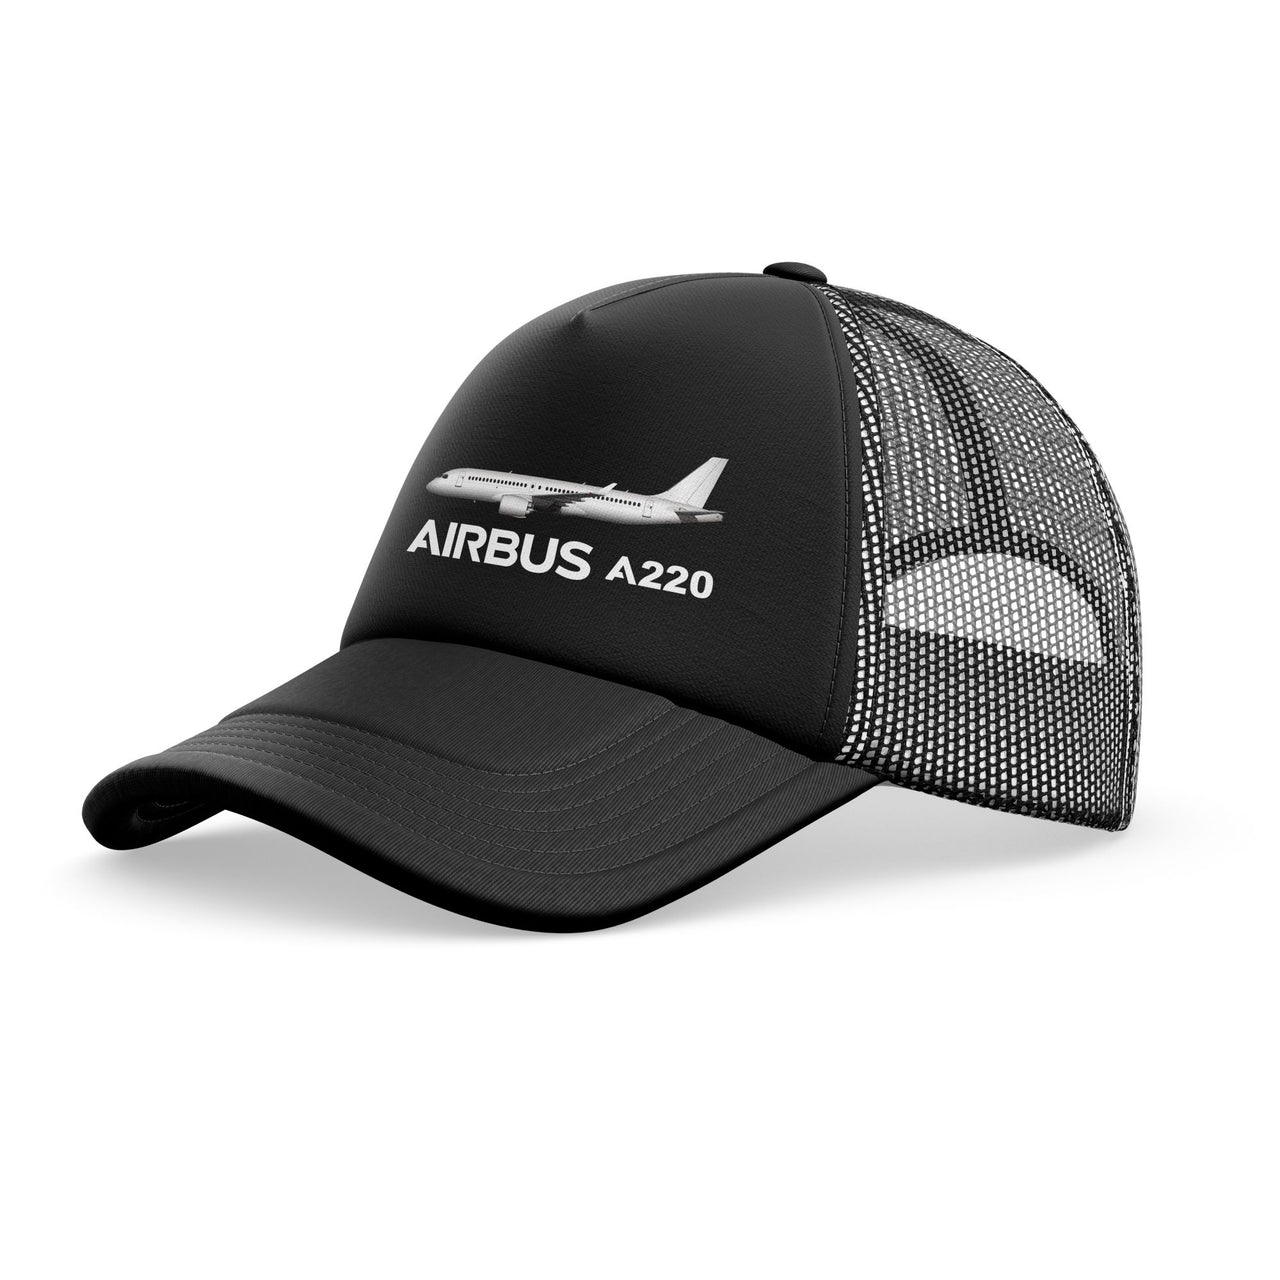 The Airbus A220 Designed Trucker Caps & Hats